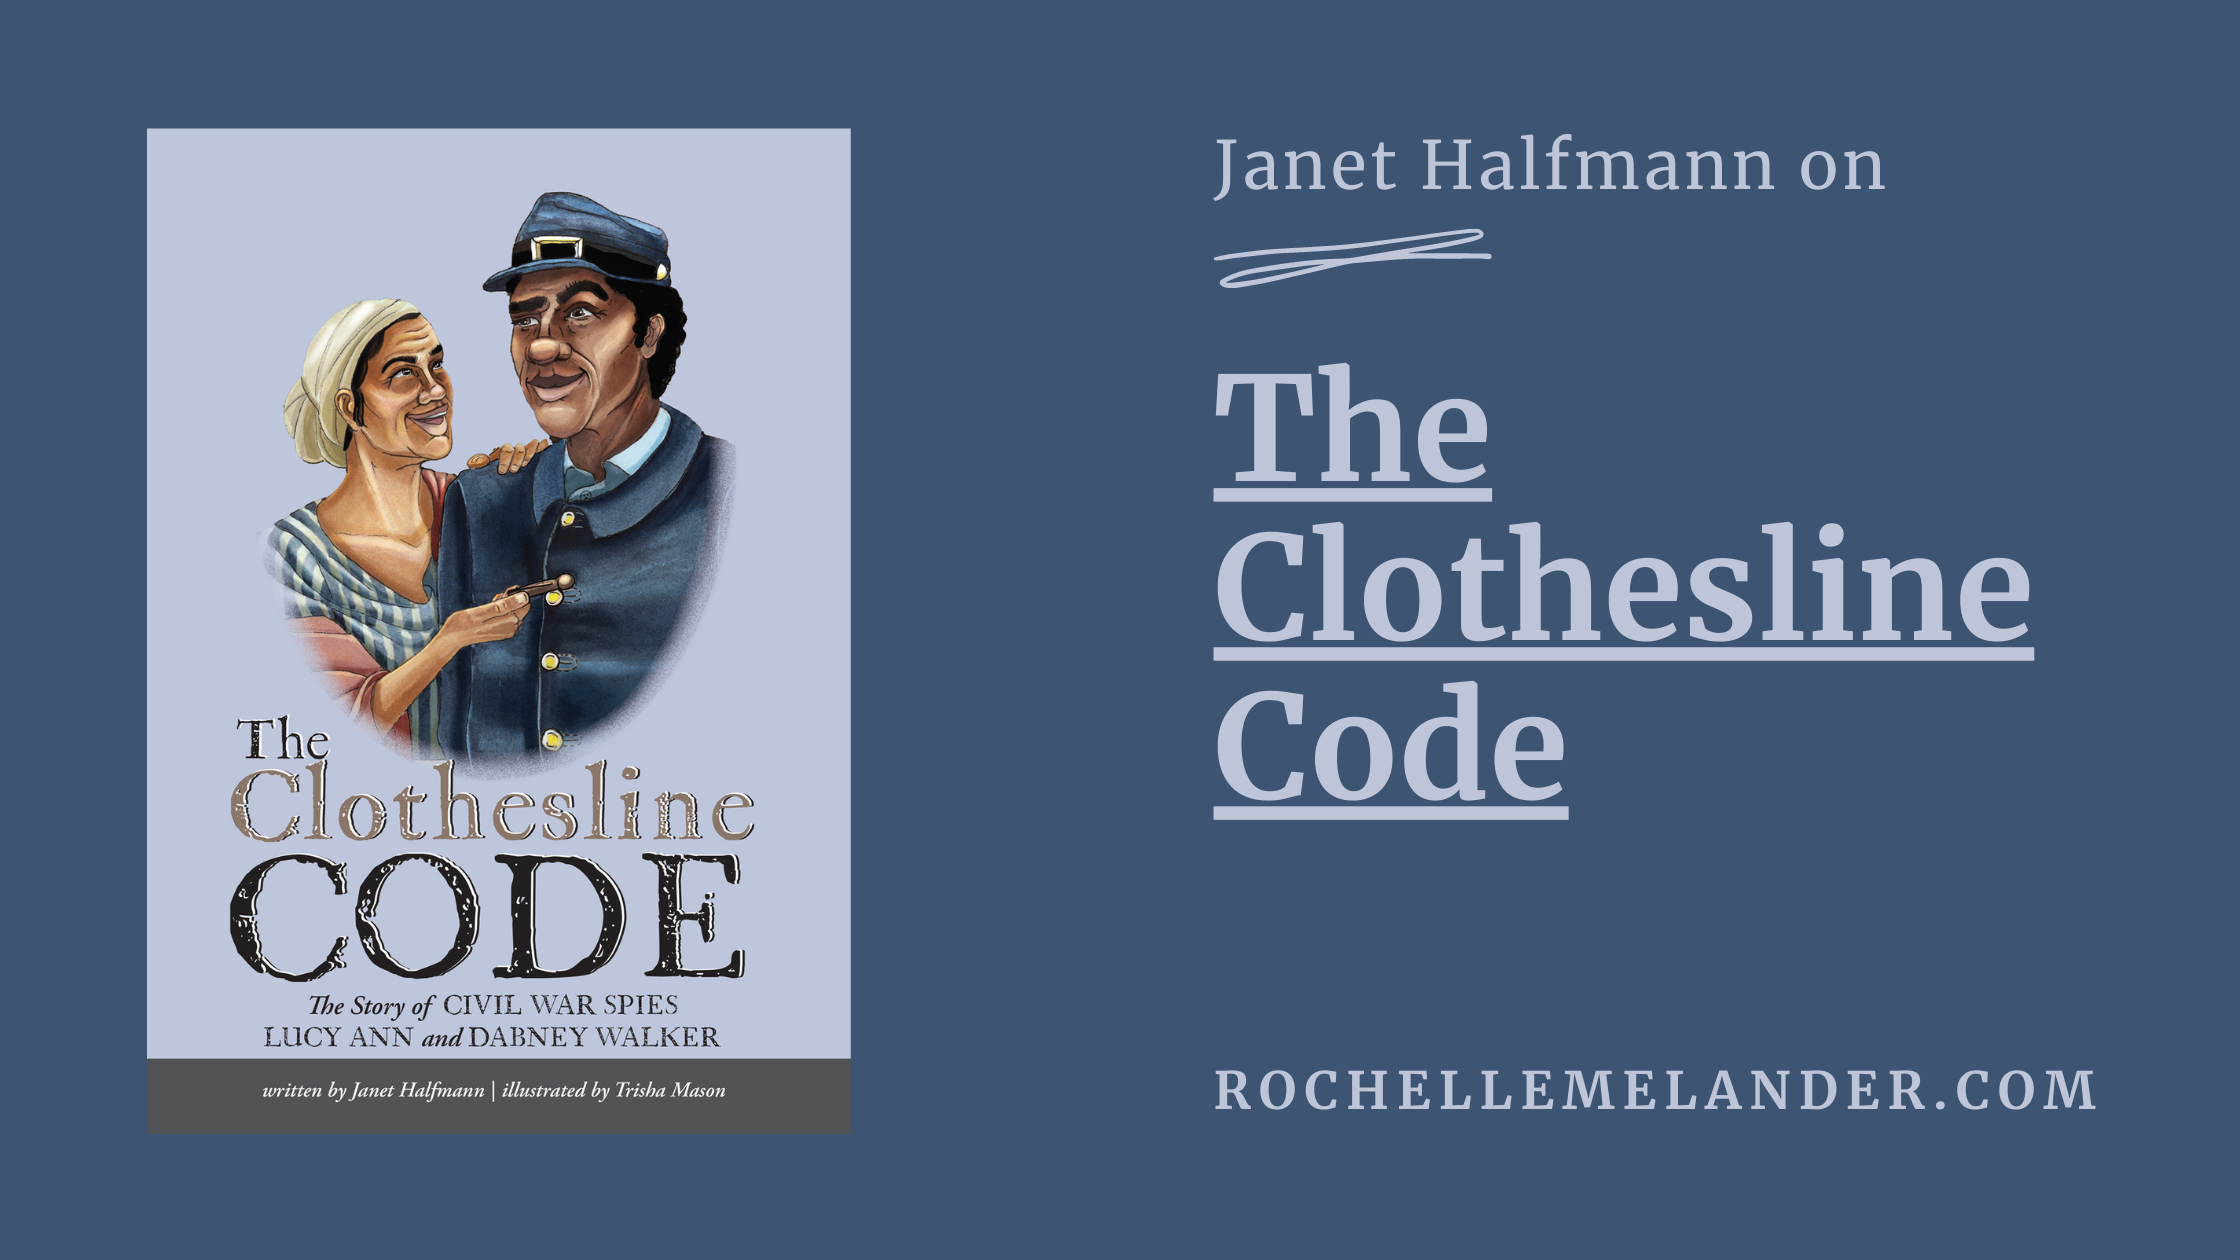 11The Clothesline Code